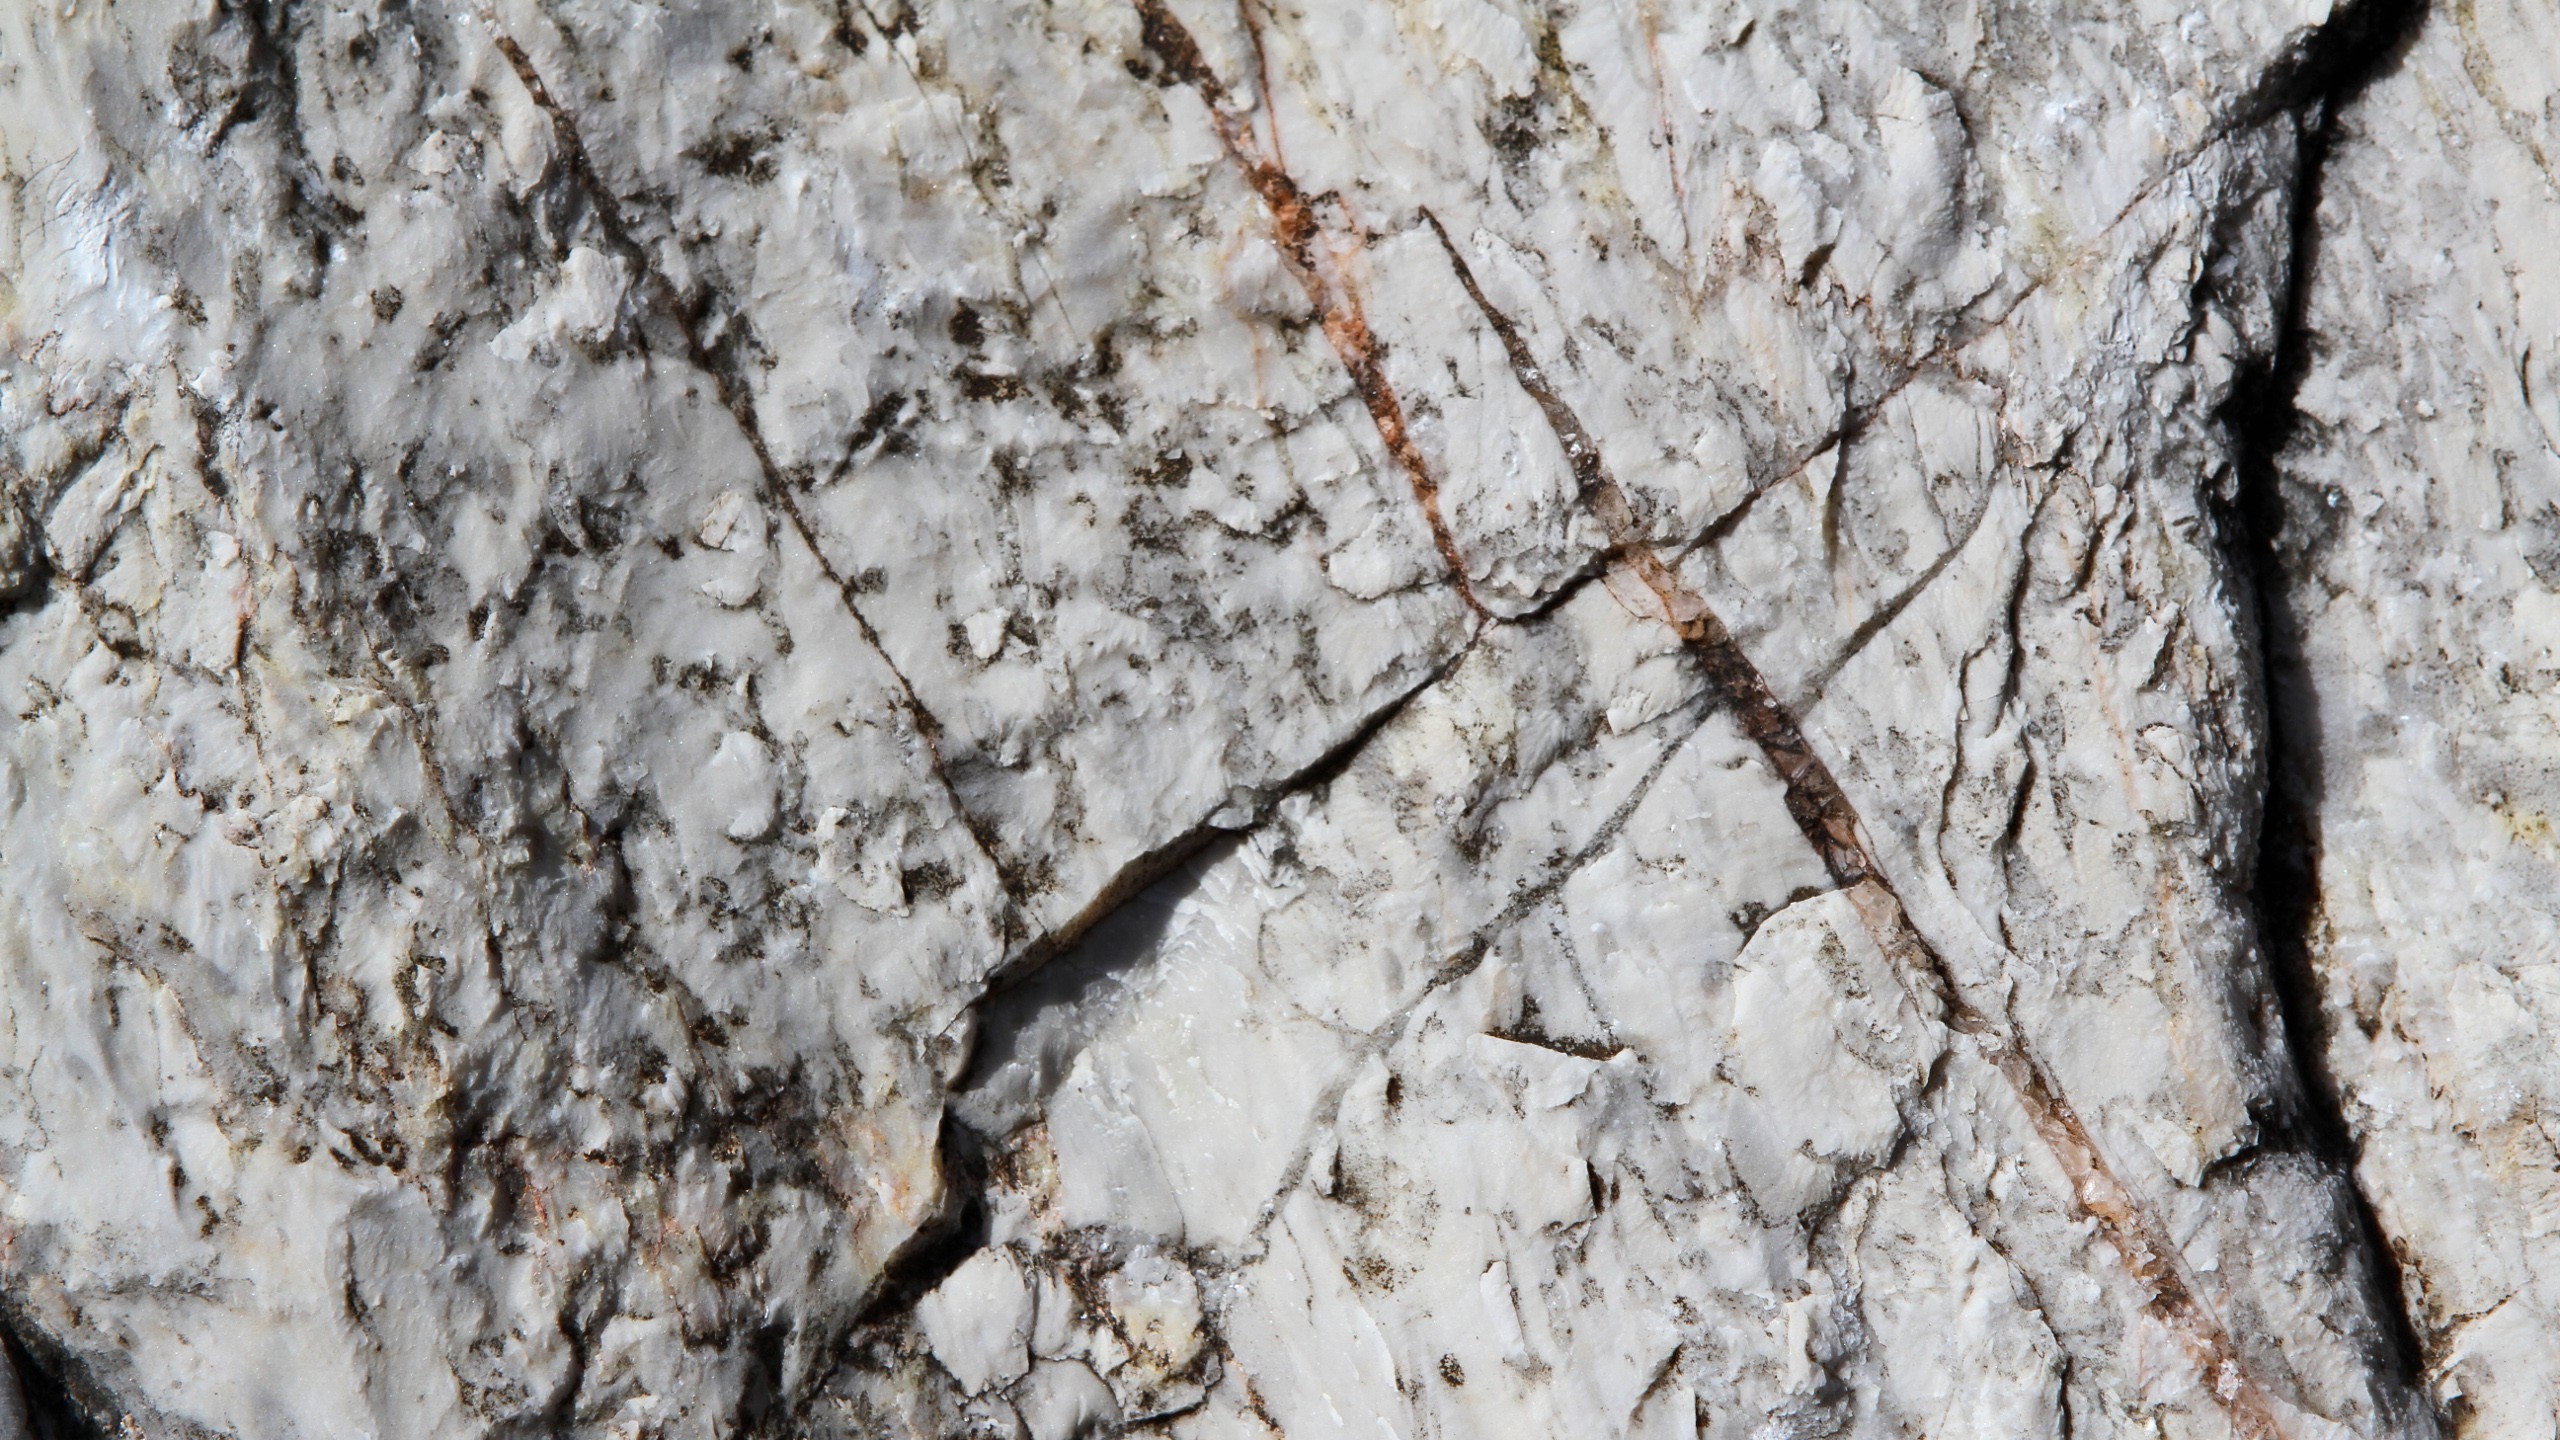 A close up of the surface texture on some rocks - Marble